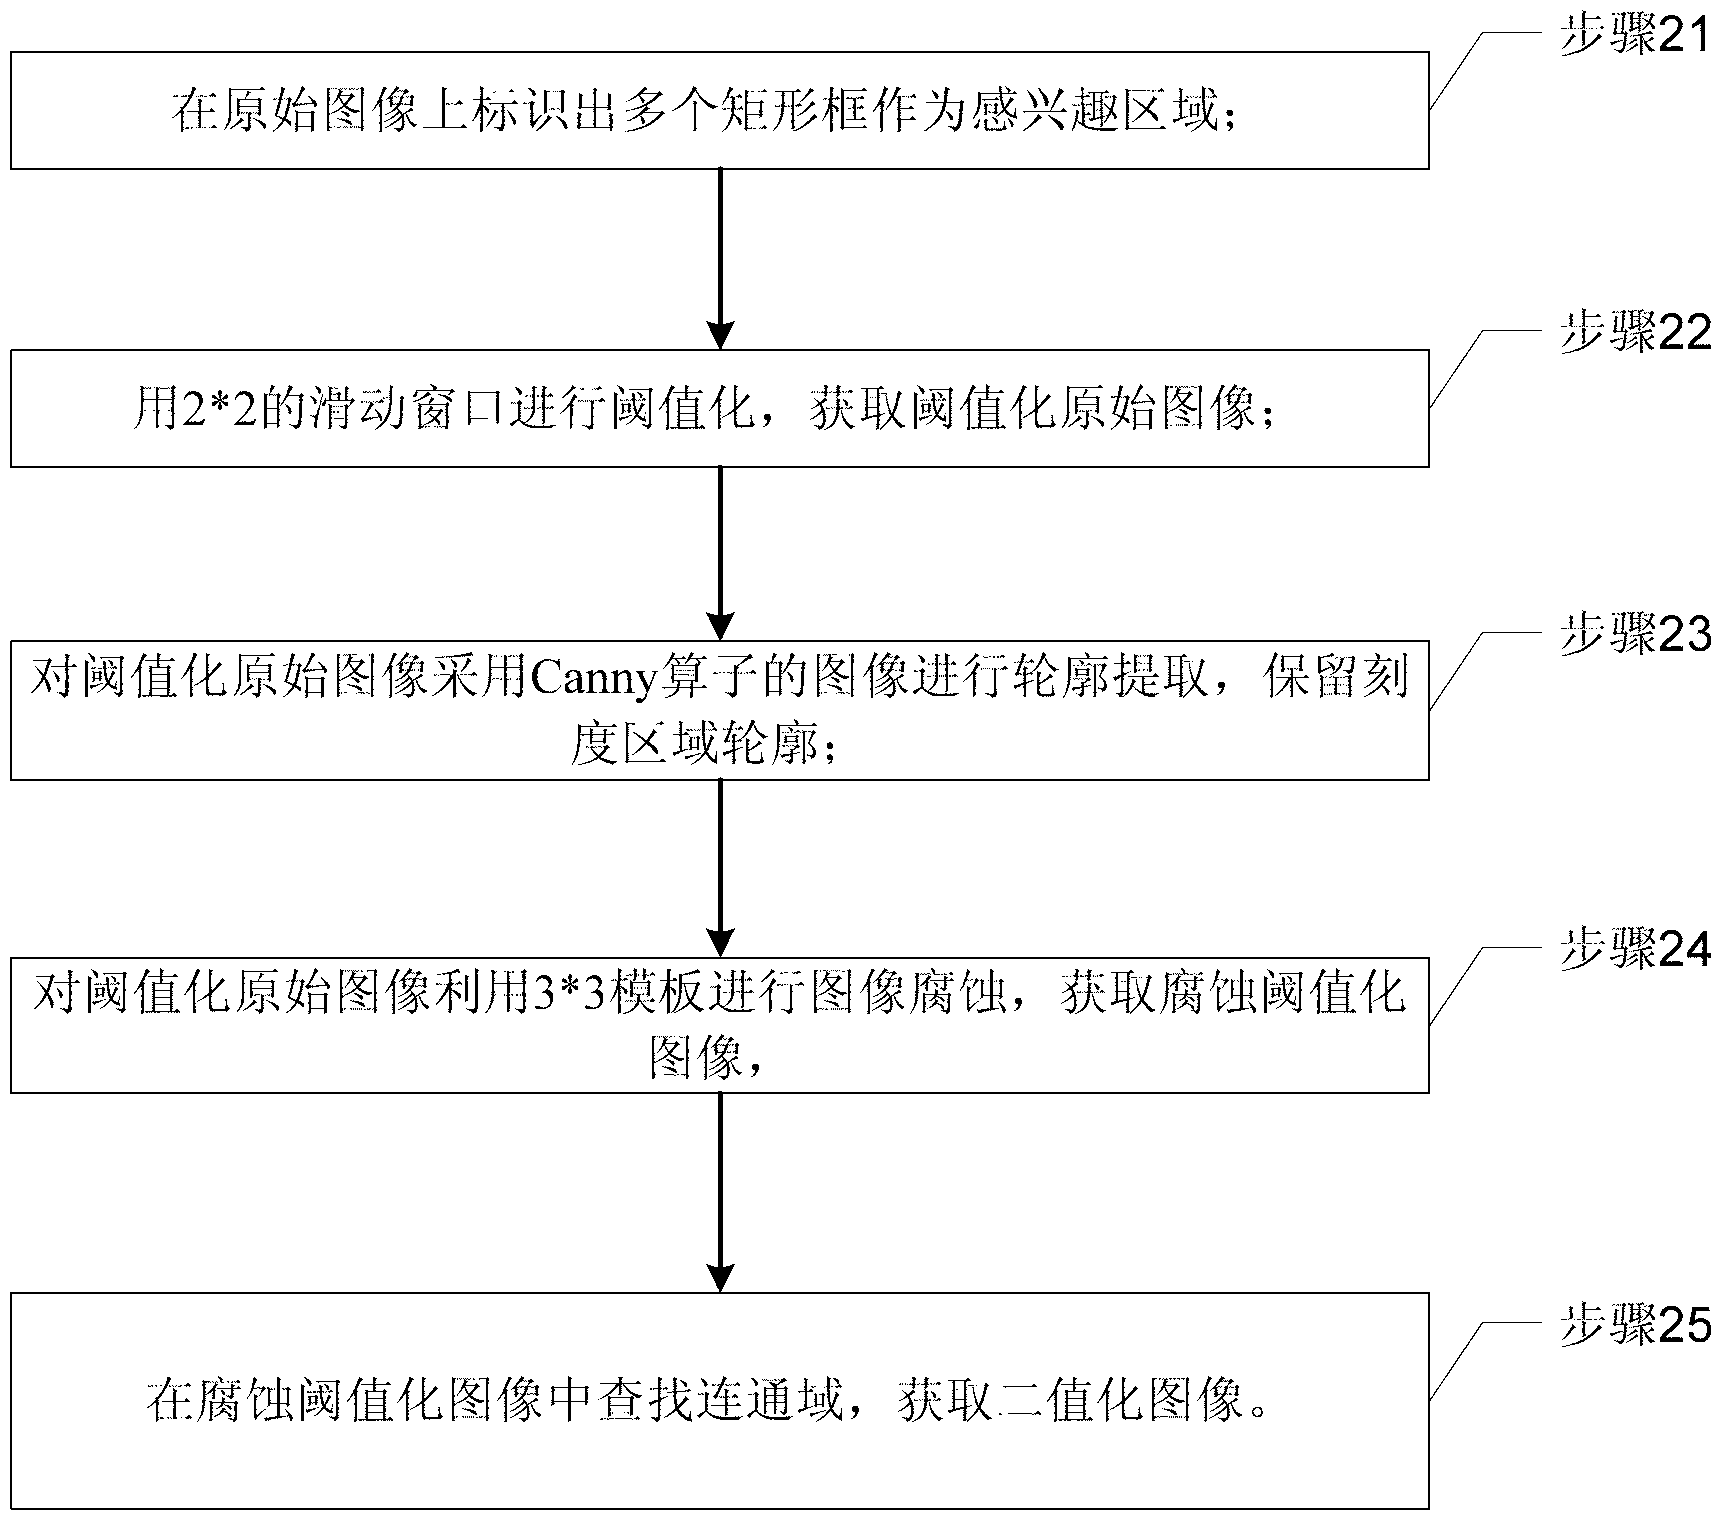 Meter pointer angle identification method based on image processing